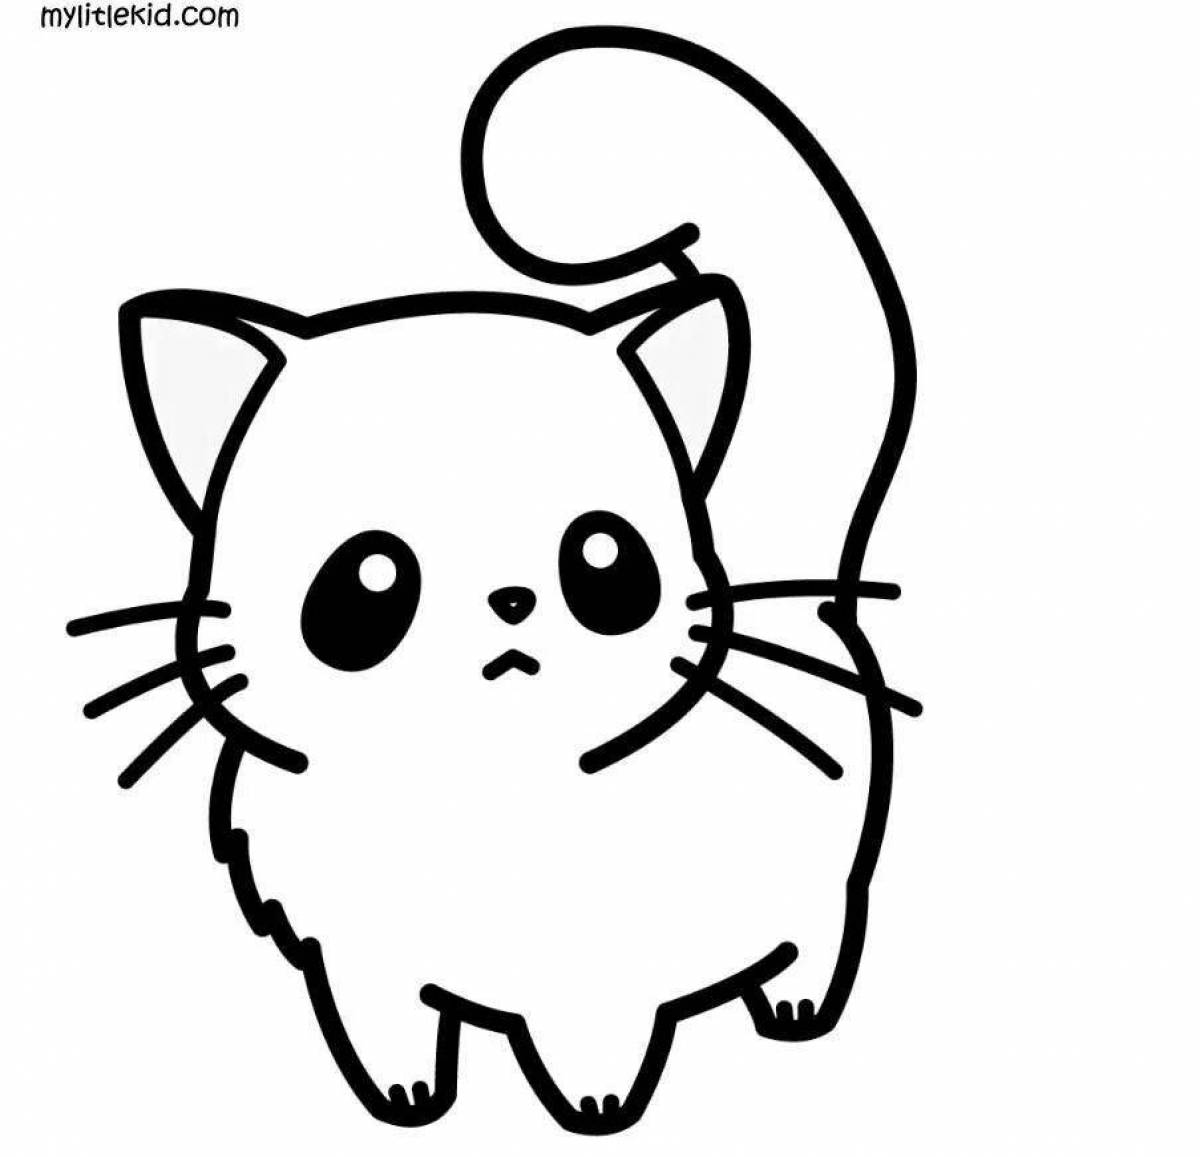 Cute and lovely cat coloring book